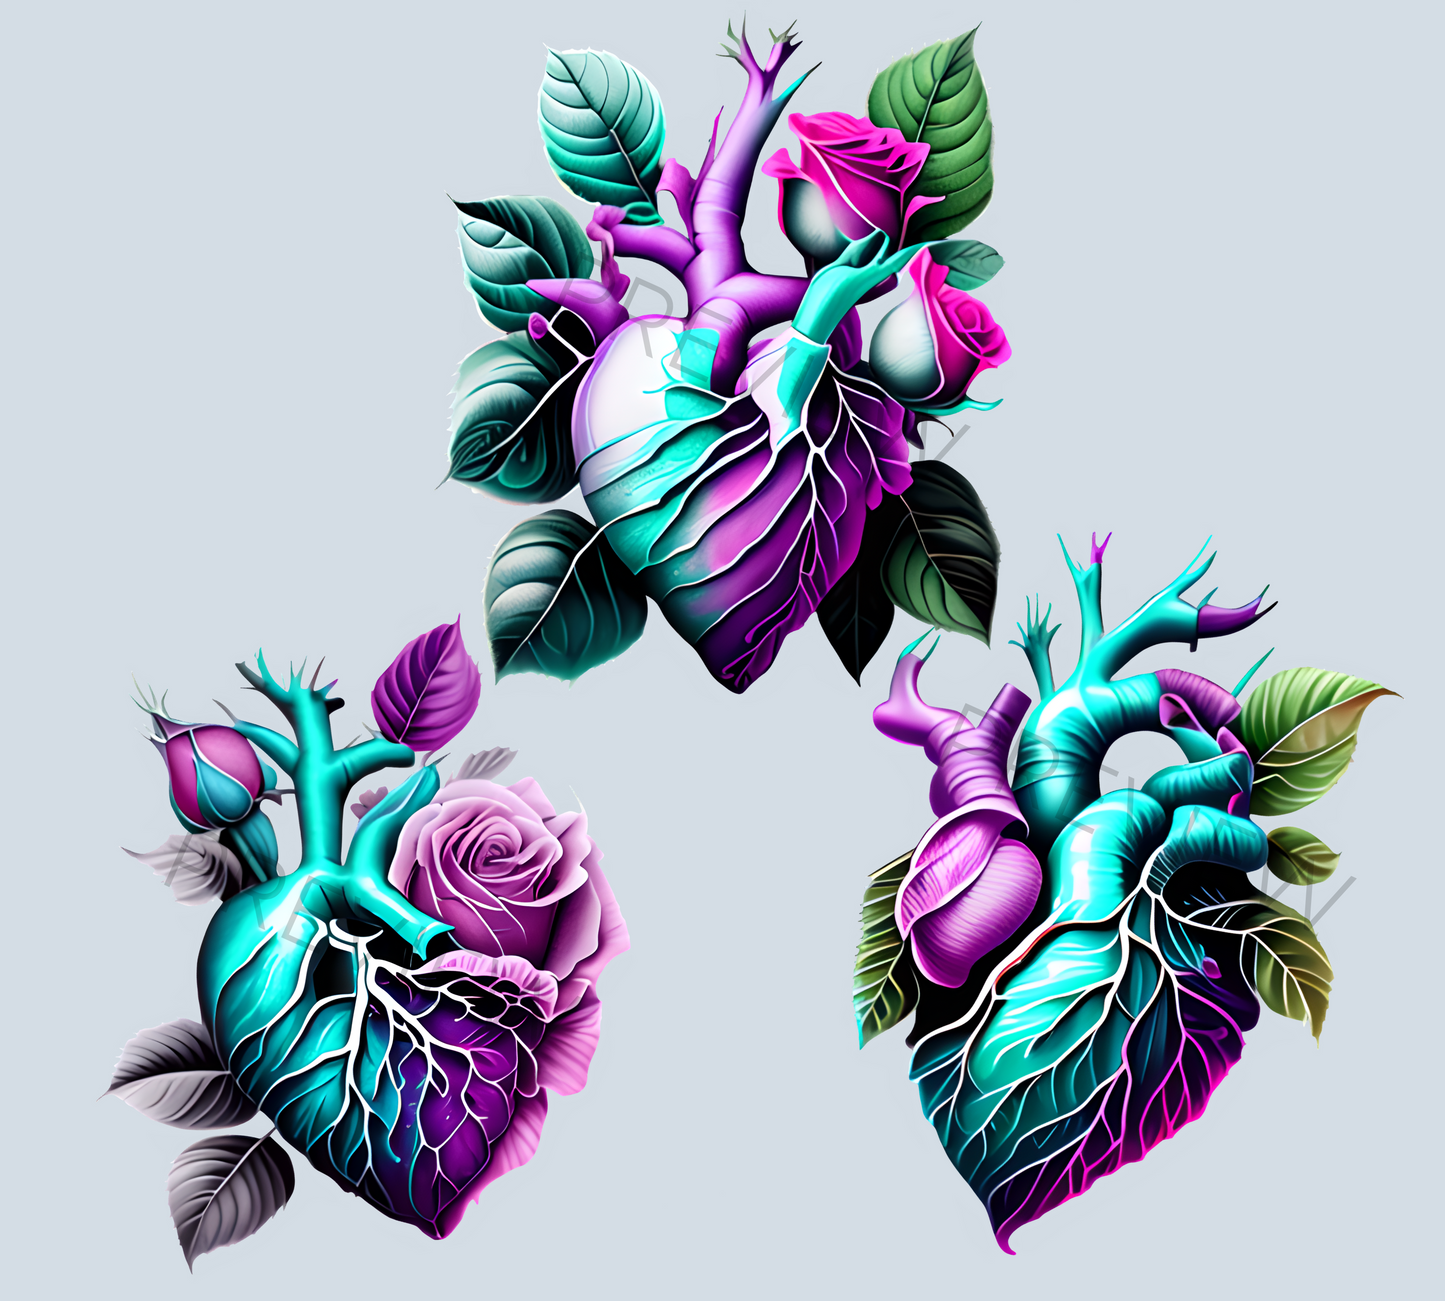 Human Heart | Anatomy Clipart | Heart Clipart | Teal & Tan Floral Heart Graphics | Anatomic Heart | Clip Art | Medical Png| Commercial Use